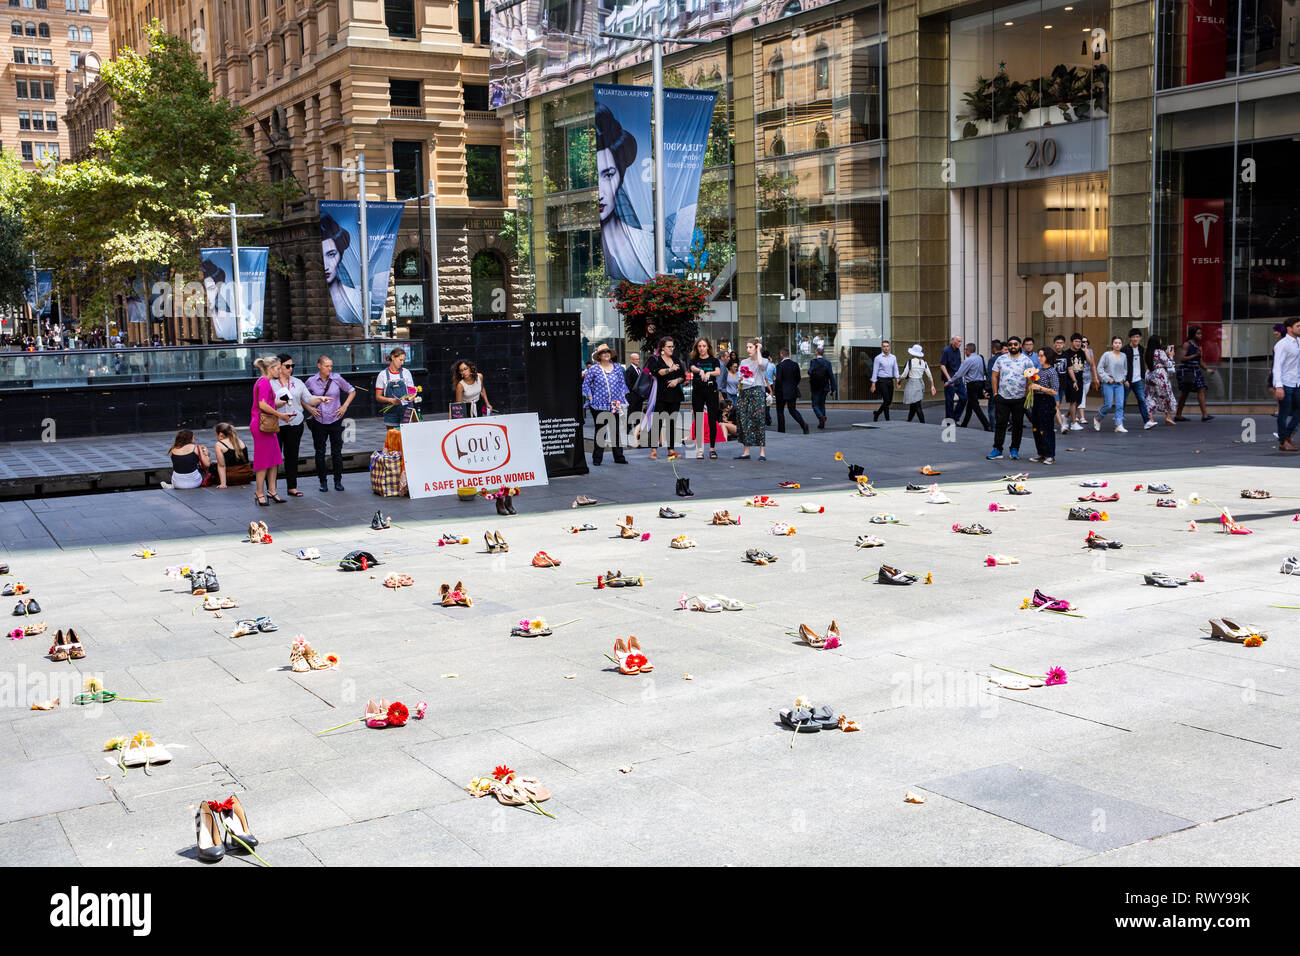 Sydney, Australia. 8th Mar, 2019. Lou's place is a refuge for women in Kings Cross, Sydney. Here in Martin Place is placed one pair of womens shoes that represent each woman who died in 2018 as a result of domestic violence in Australia, Martin Place, Sydney city centre, Australia. Friday 8th March 2019. Credit: martin berry/Alamy Live News Stock Photo